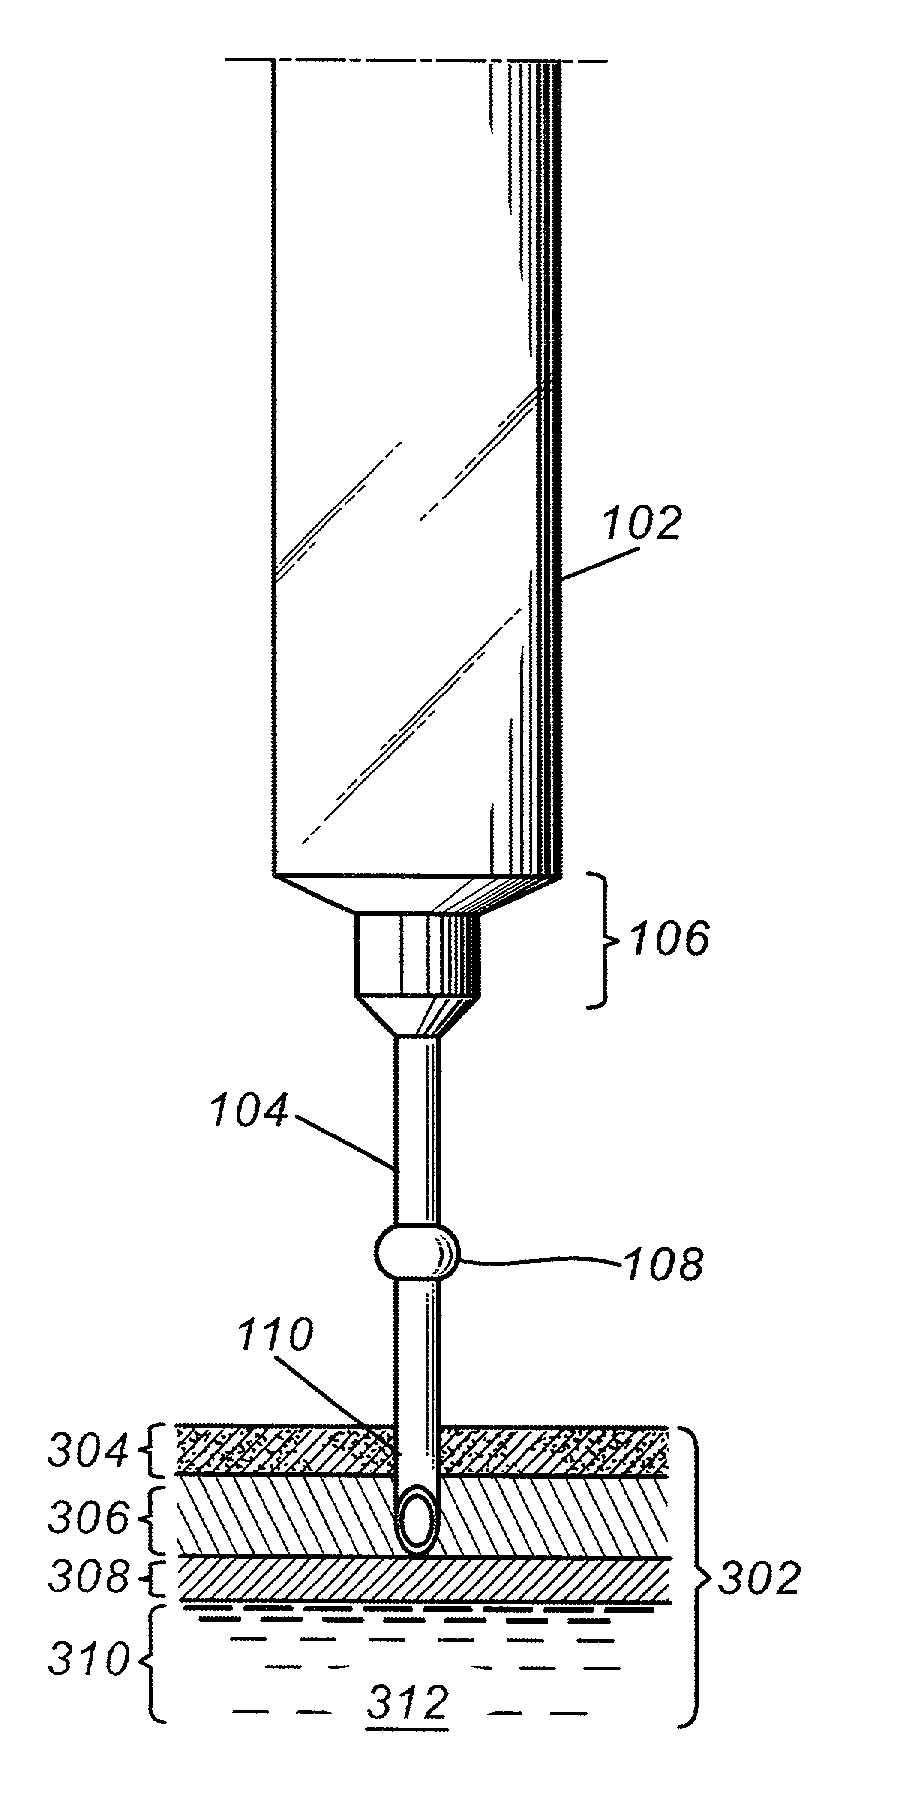 Apparatuses and methods for transcleral cautery and subretinal drainage